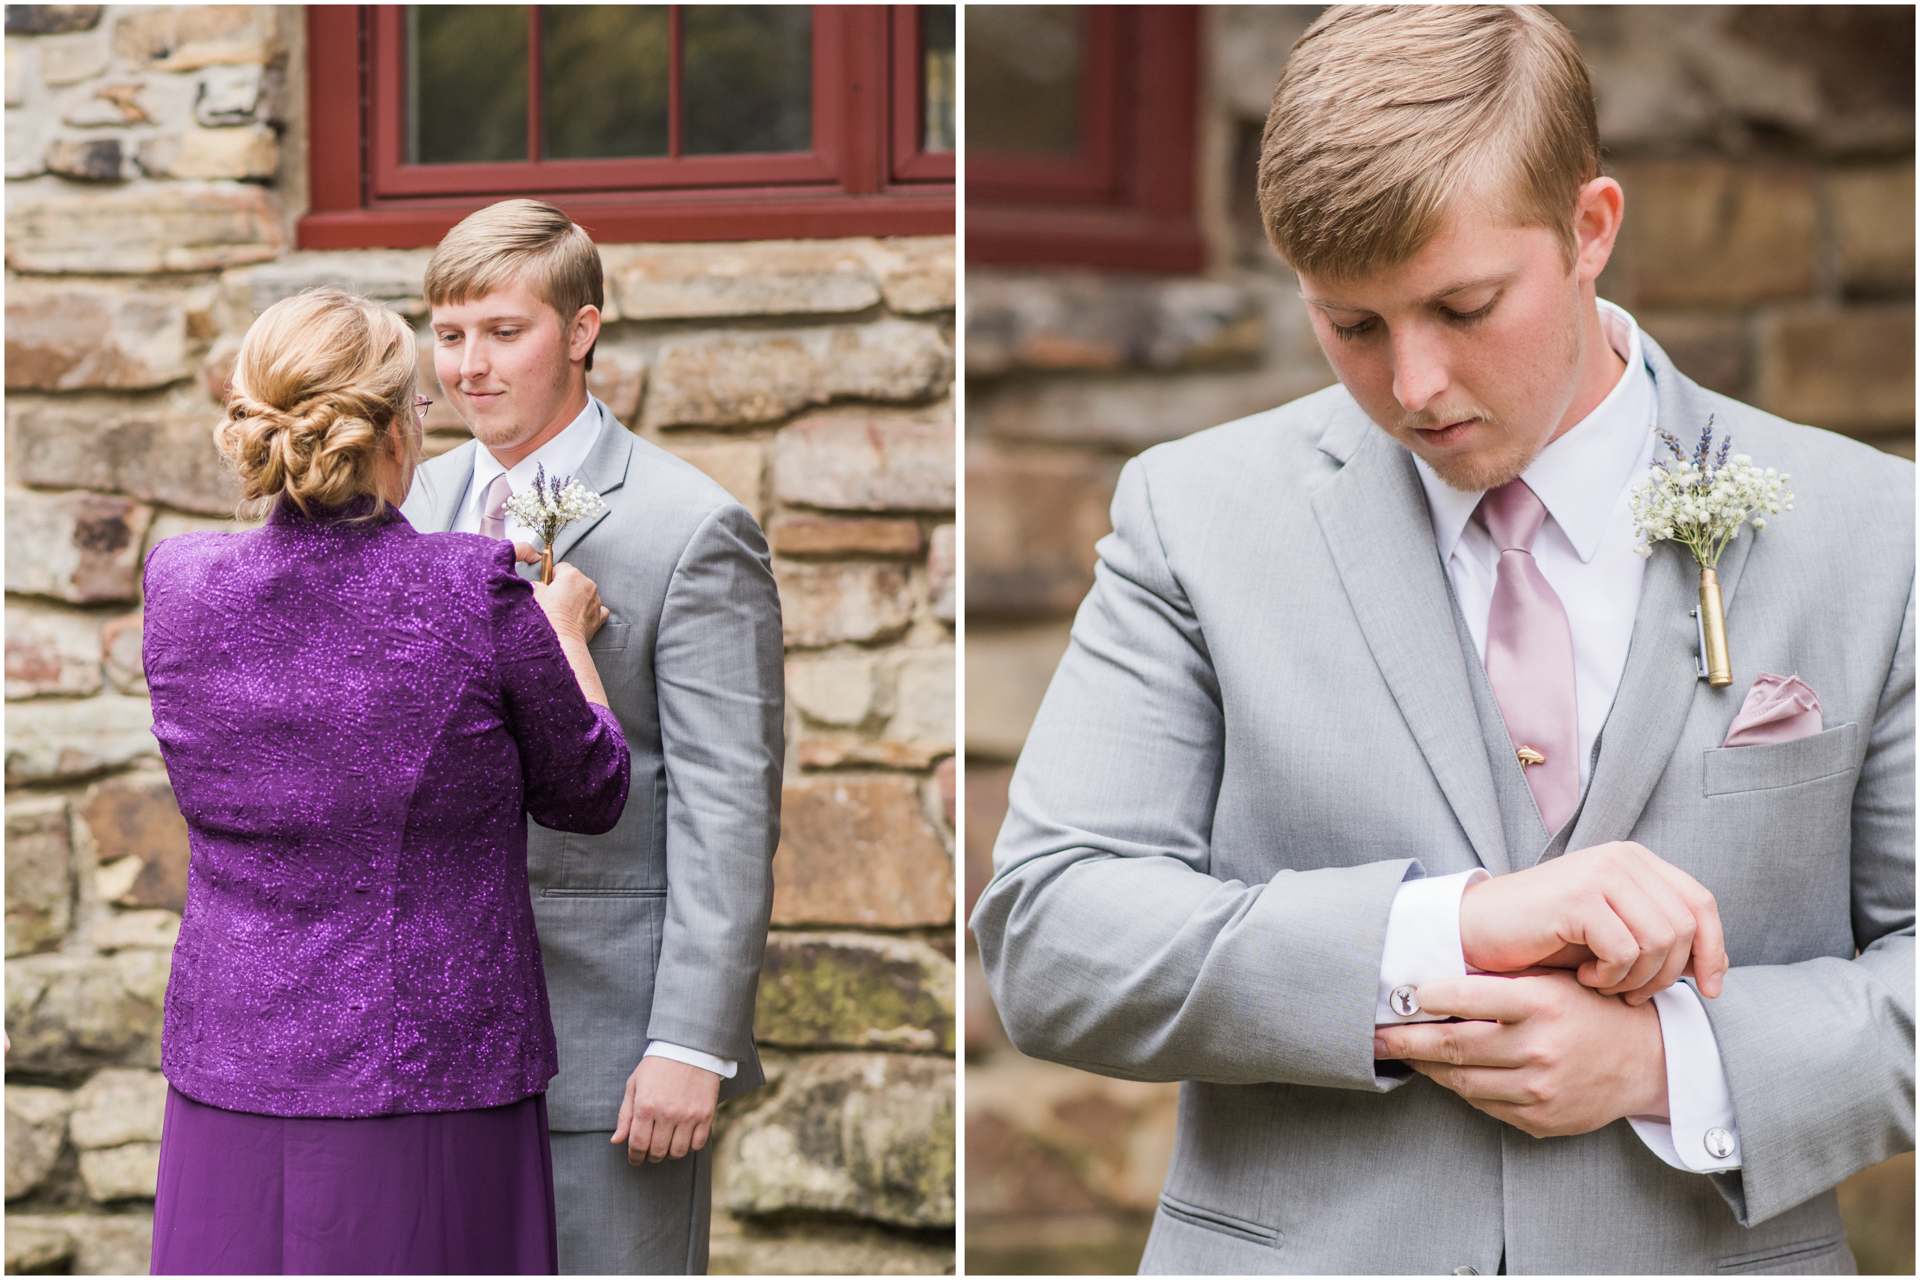 Mother of the Groom Pinning Shotgun Shell Boutonniere